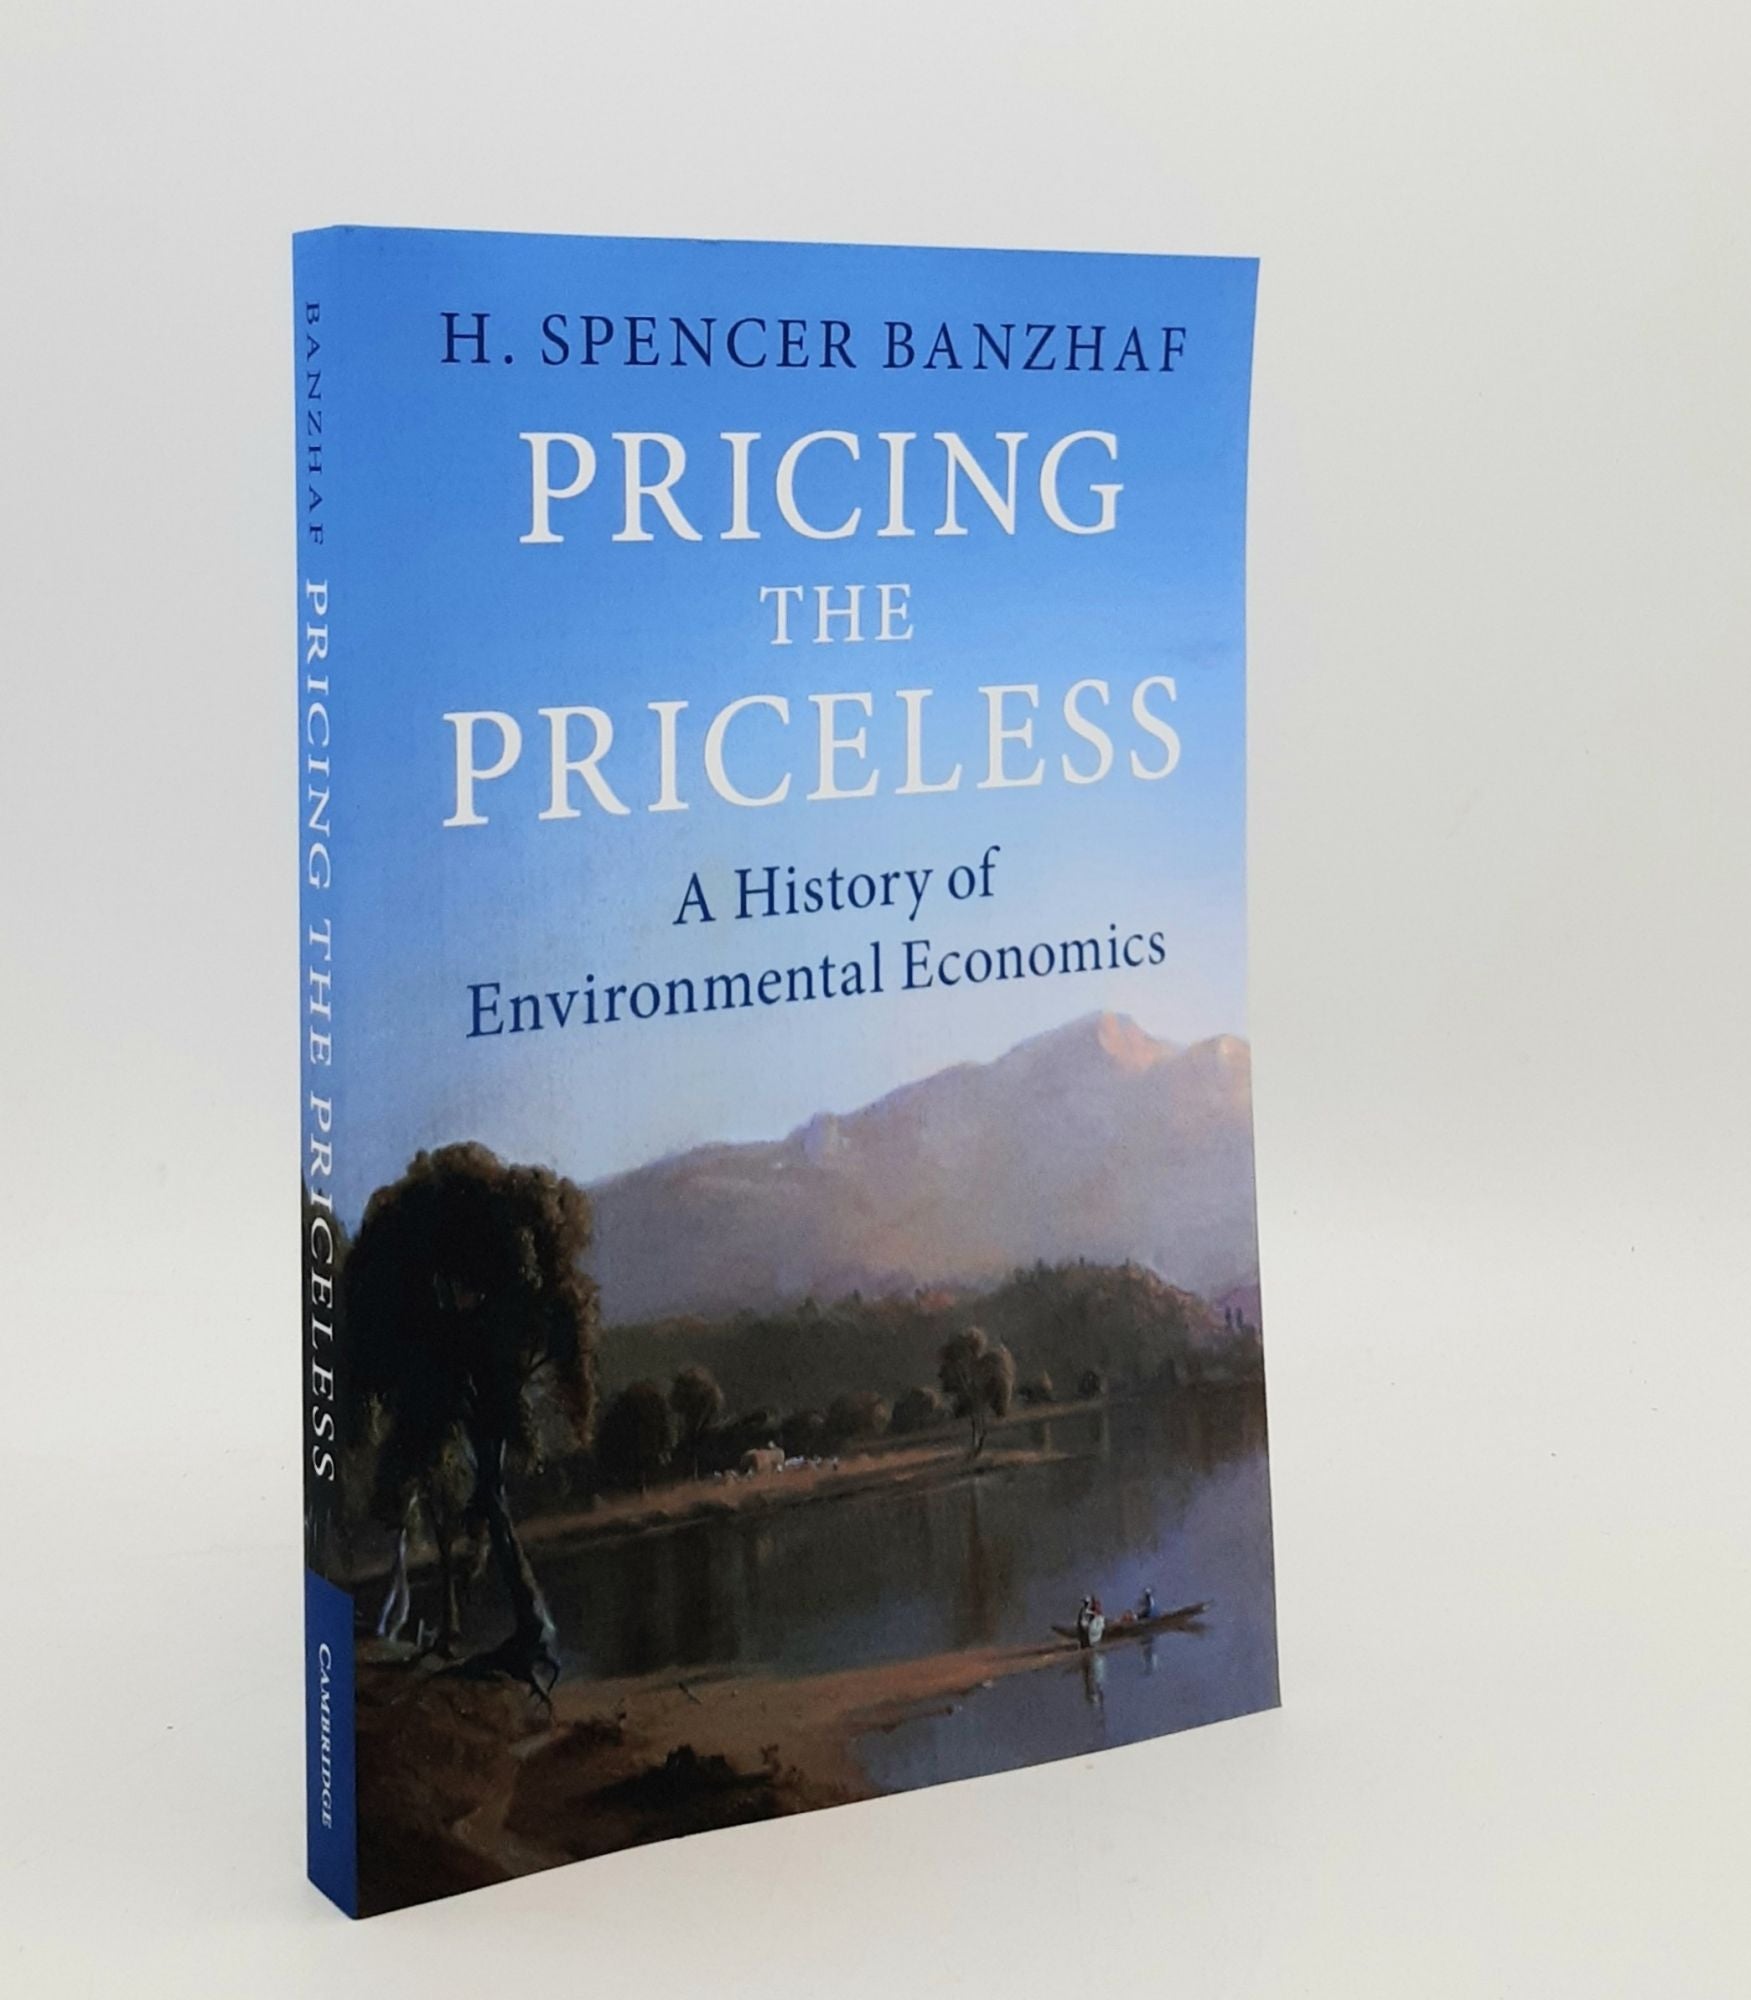 BANZHAF H. Spencer - Pricing the Priceless a History of Environmental Economics (Historical Perspectives on Modern Economics)